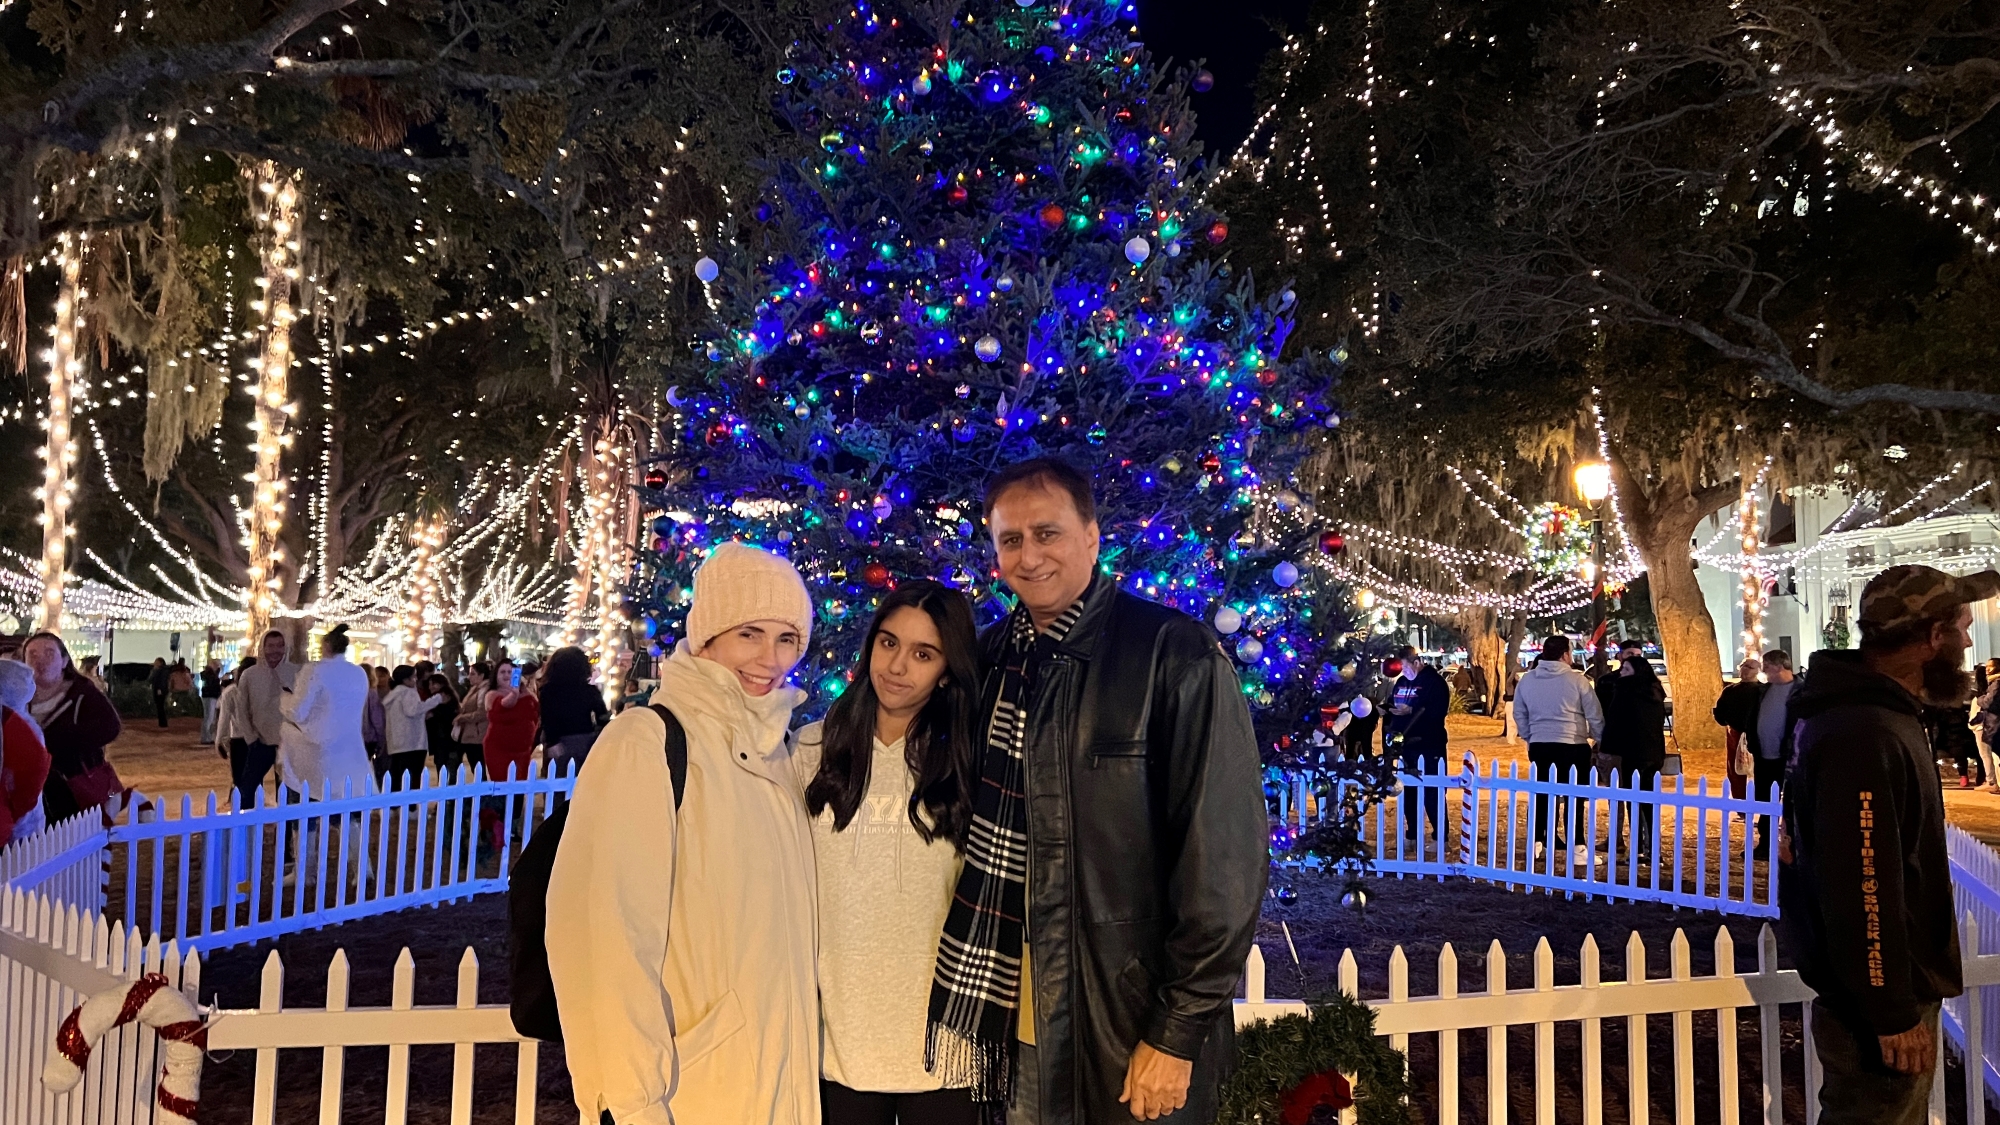 Nights of Light in St. Augustine, Florida